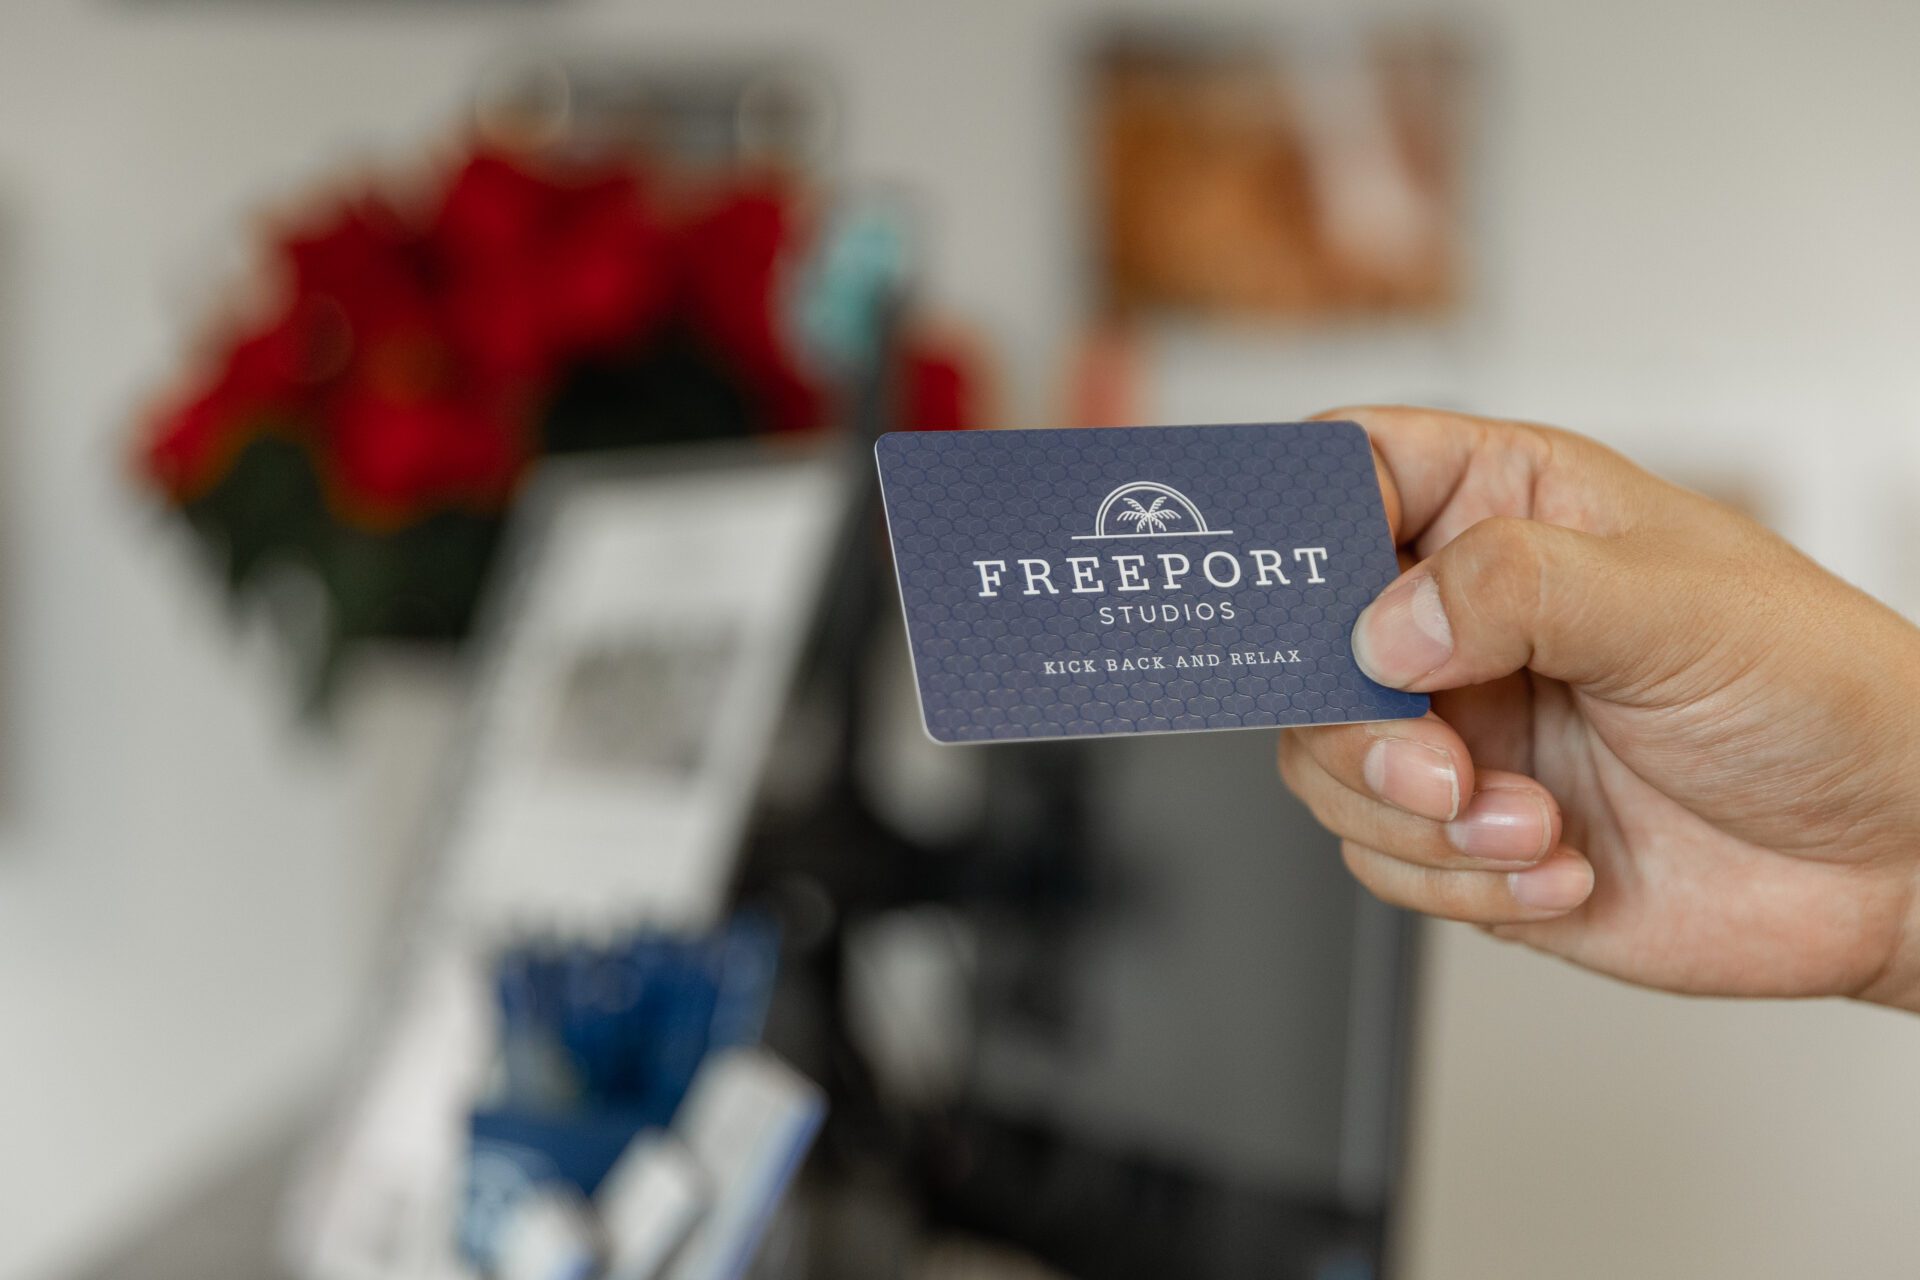 Freeport Studios Offers Corporate Rates for Workforce Housing Groups